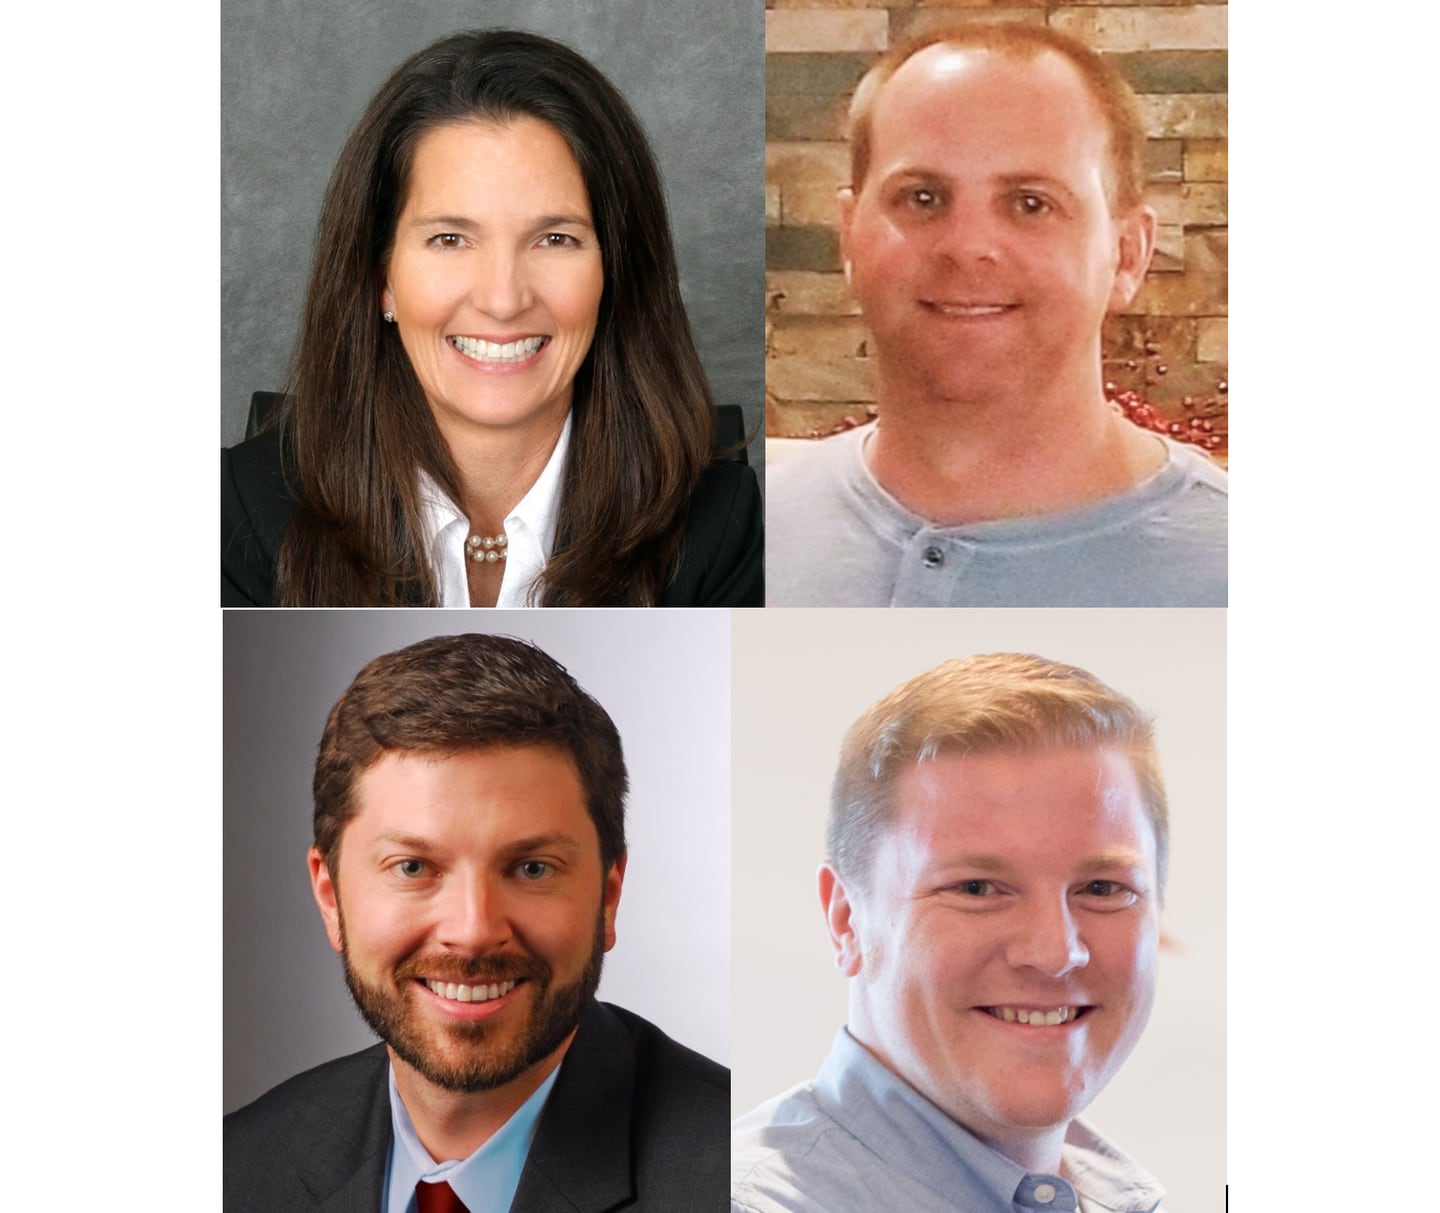 The candidates for the Crystal Lake City Council are (clockwise) Mandy Montford, Robert Brechbiel, Ian Philpot and Cameron Hubbard.